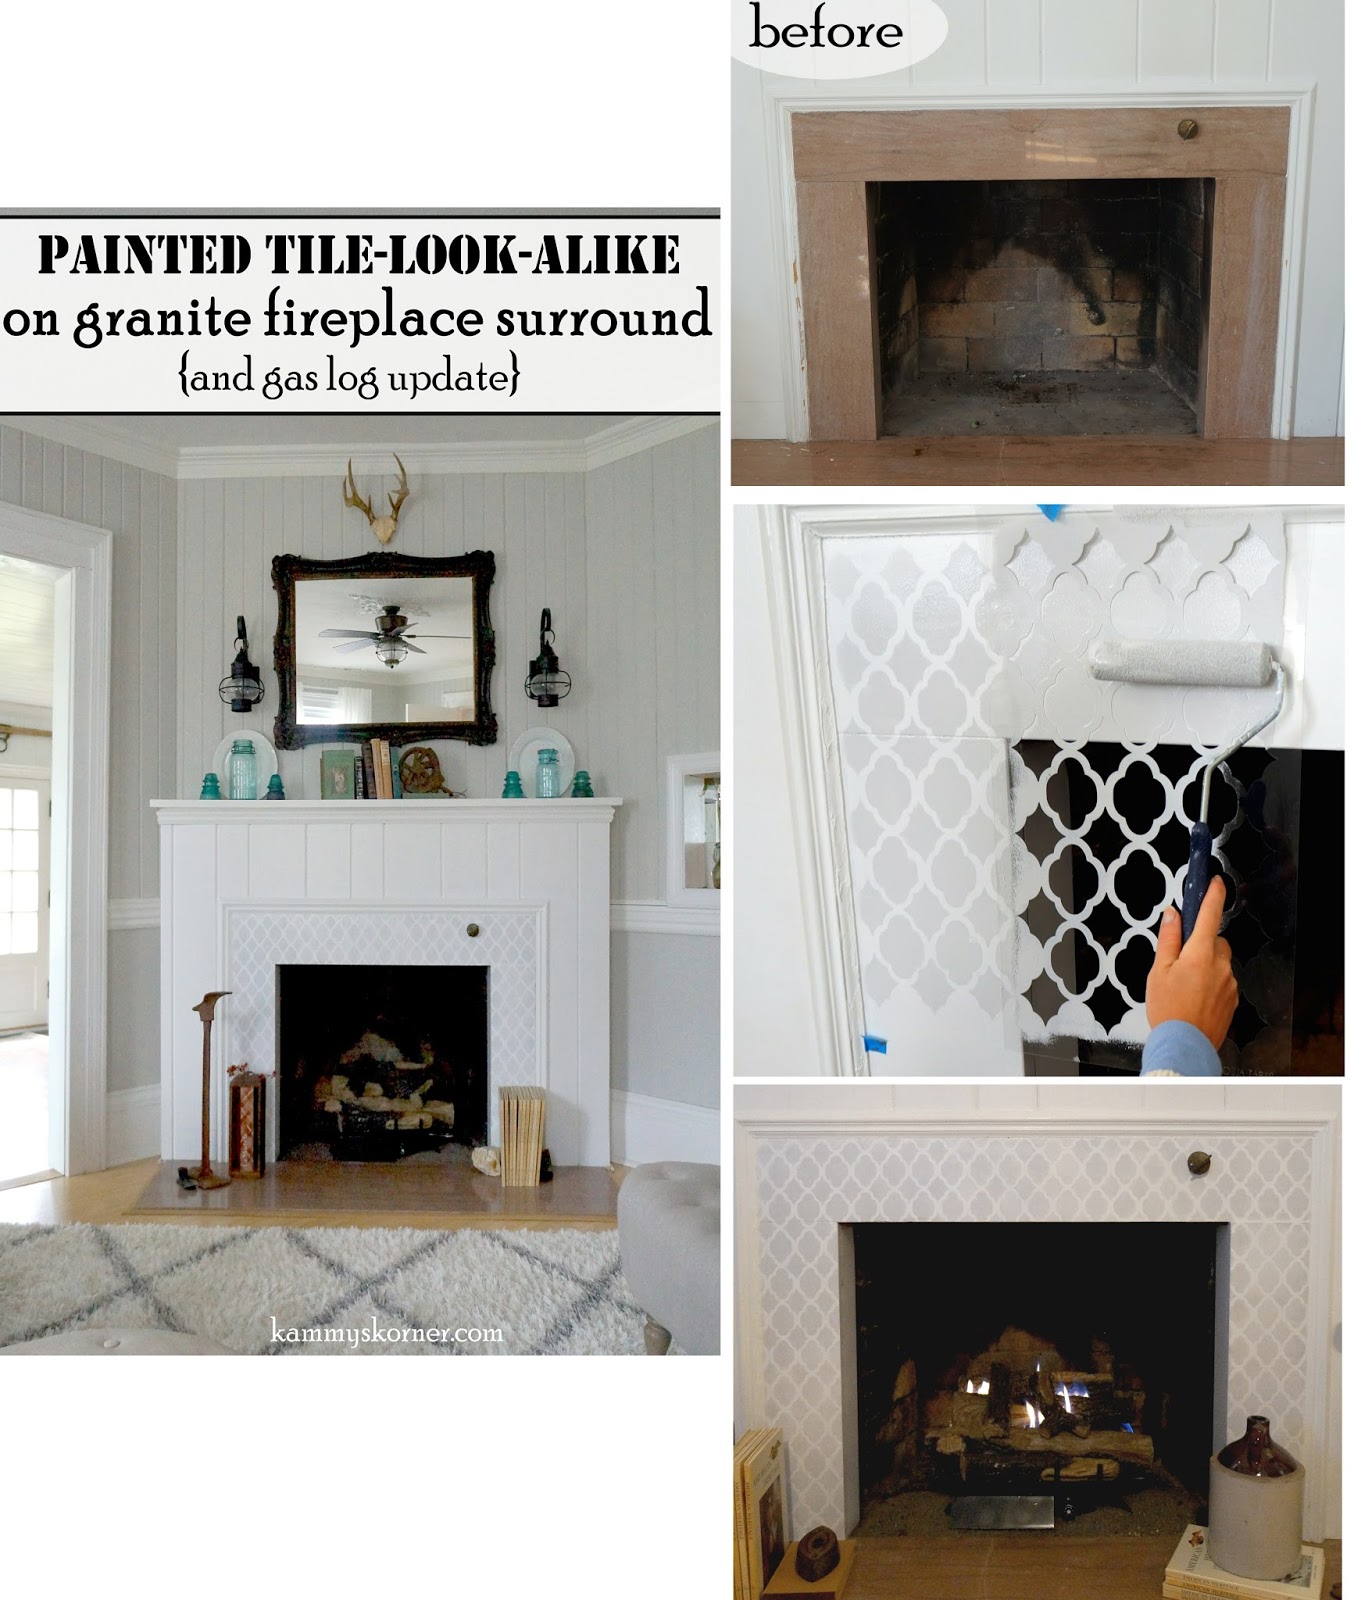 Stenciled Granite Fireplace Surround, How To Tile Over Granite Fireplace Surround